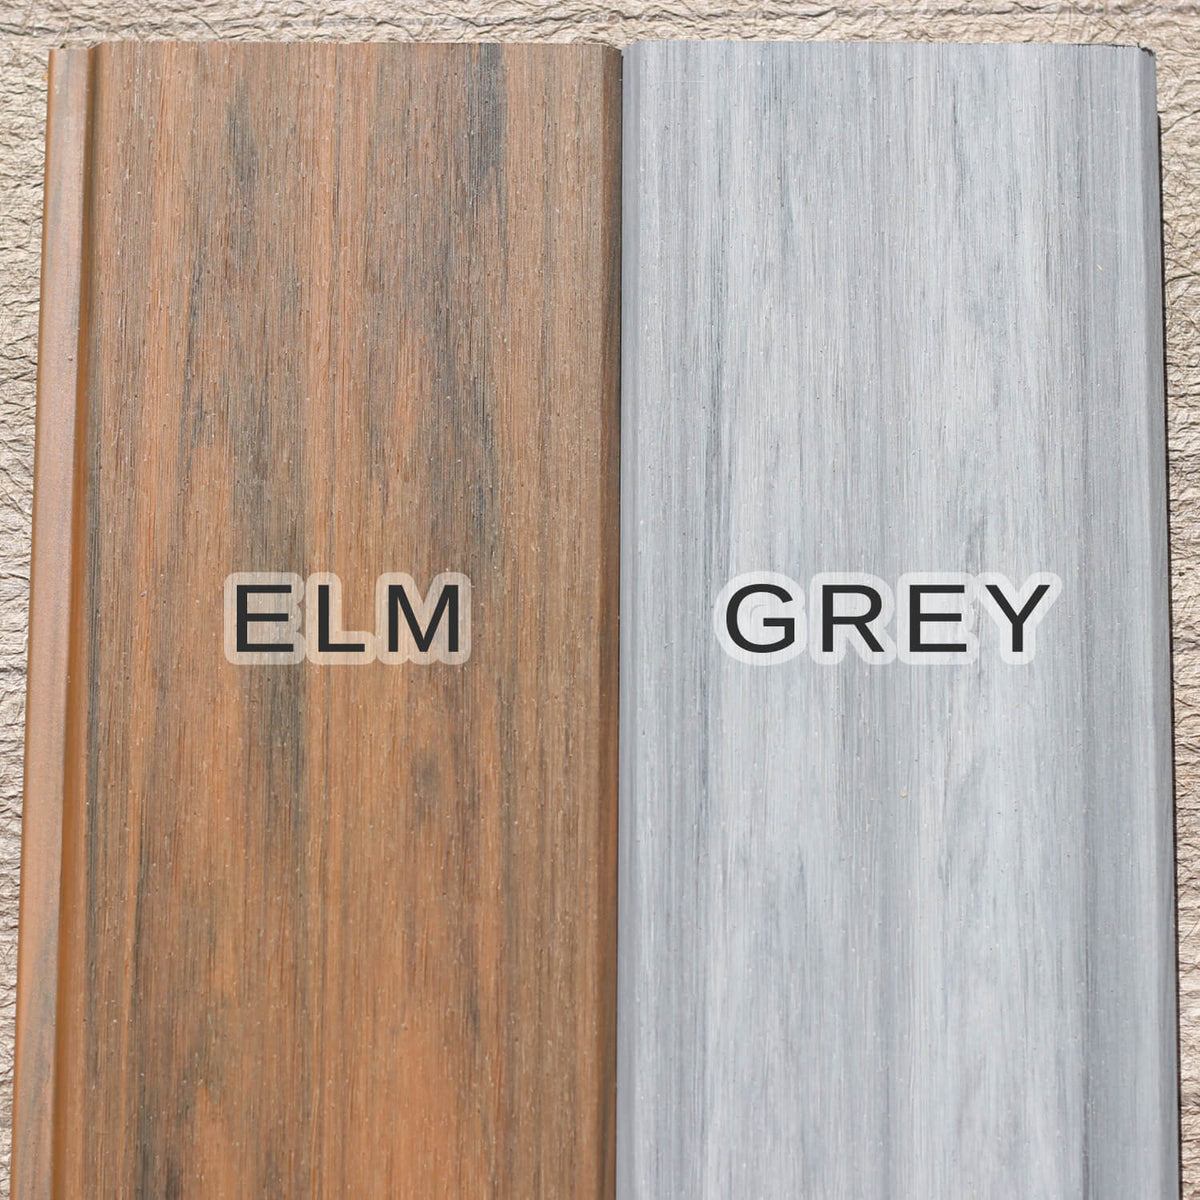 elm wood and grey wood composite tongue and groove fence boards